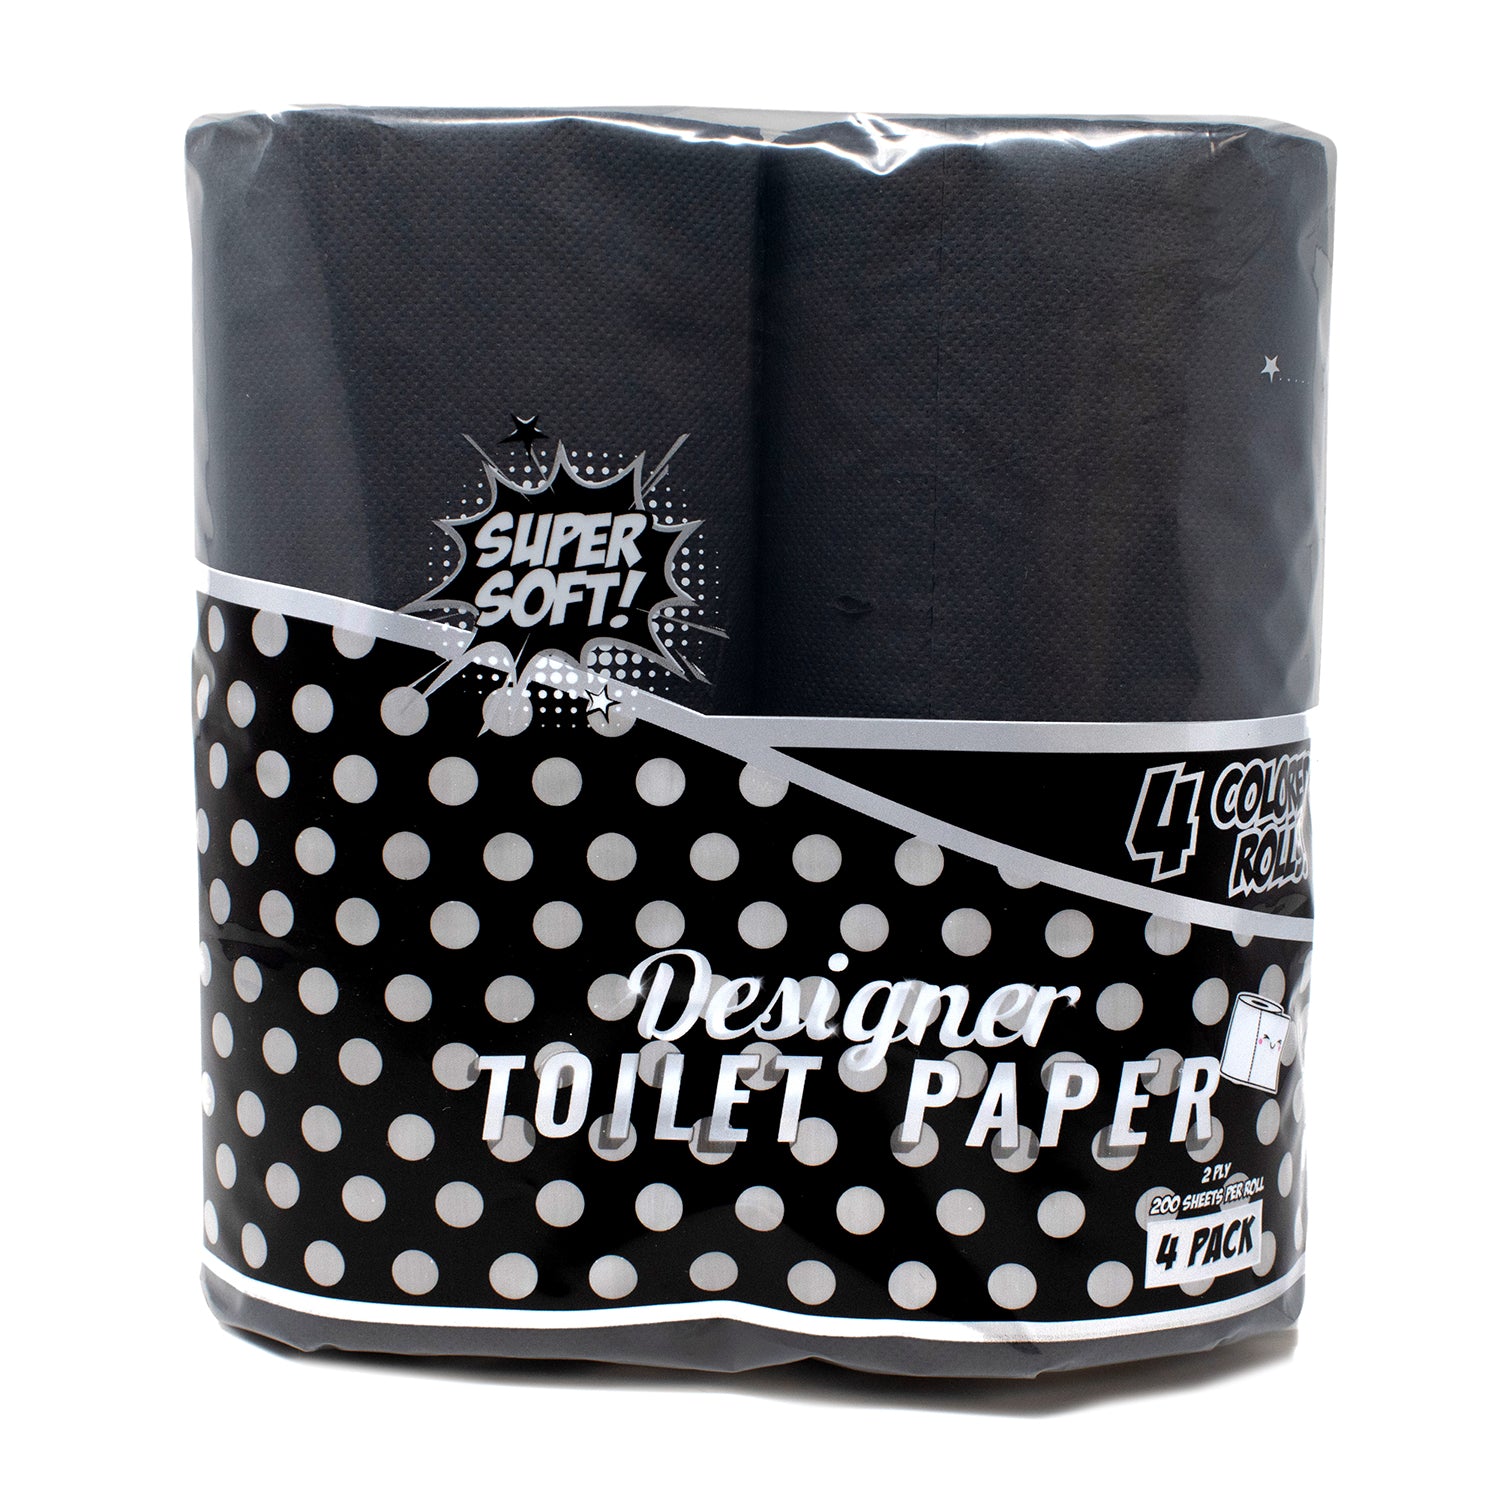 Designer Colored Toilet Paper Black. Brighten up your bathroom in a colorful way and make your bathroom a little more exciting. Does not dye, mark or stain on your skin. This collection is made of a 2 ply sheets, adding a style, strength and softness. Flushable and septic-safe for standard sewer and septic systems. Other colors available. 